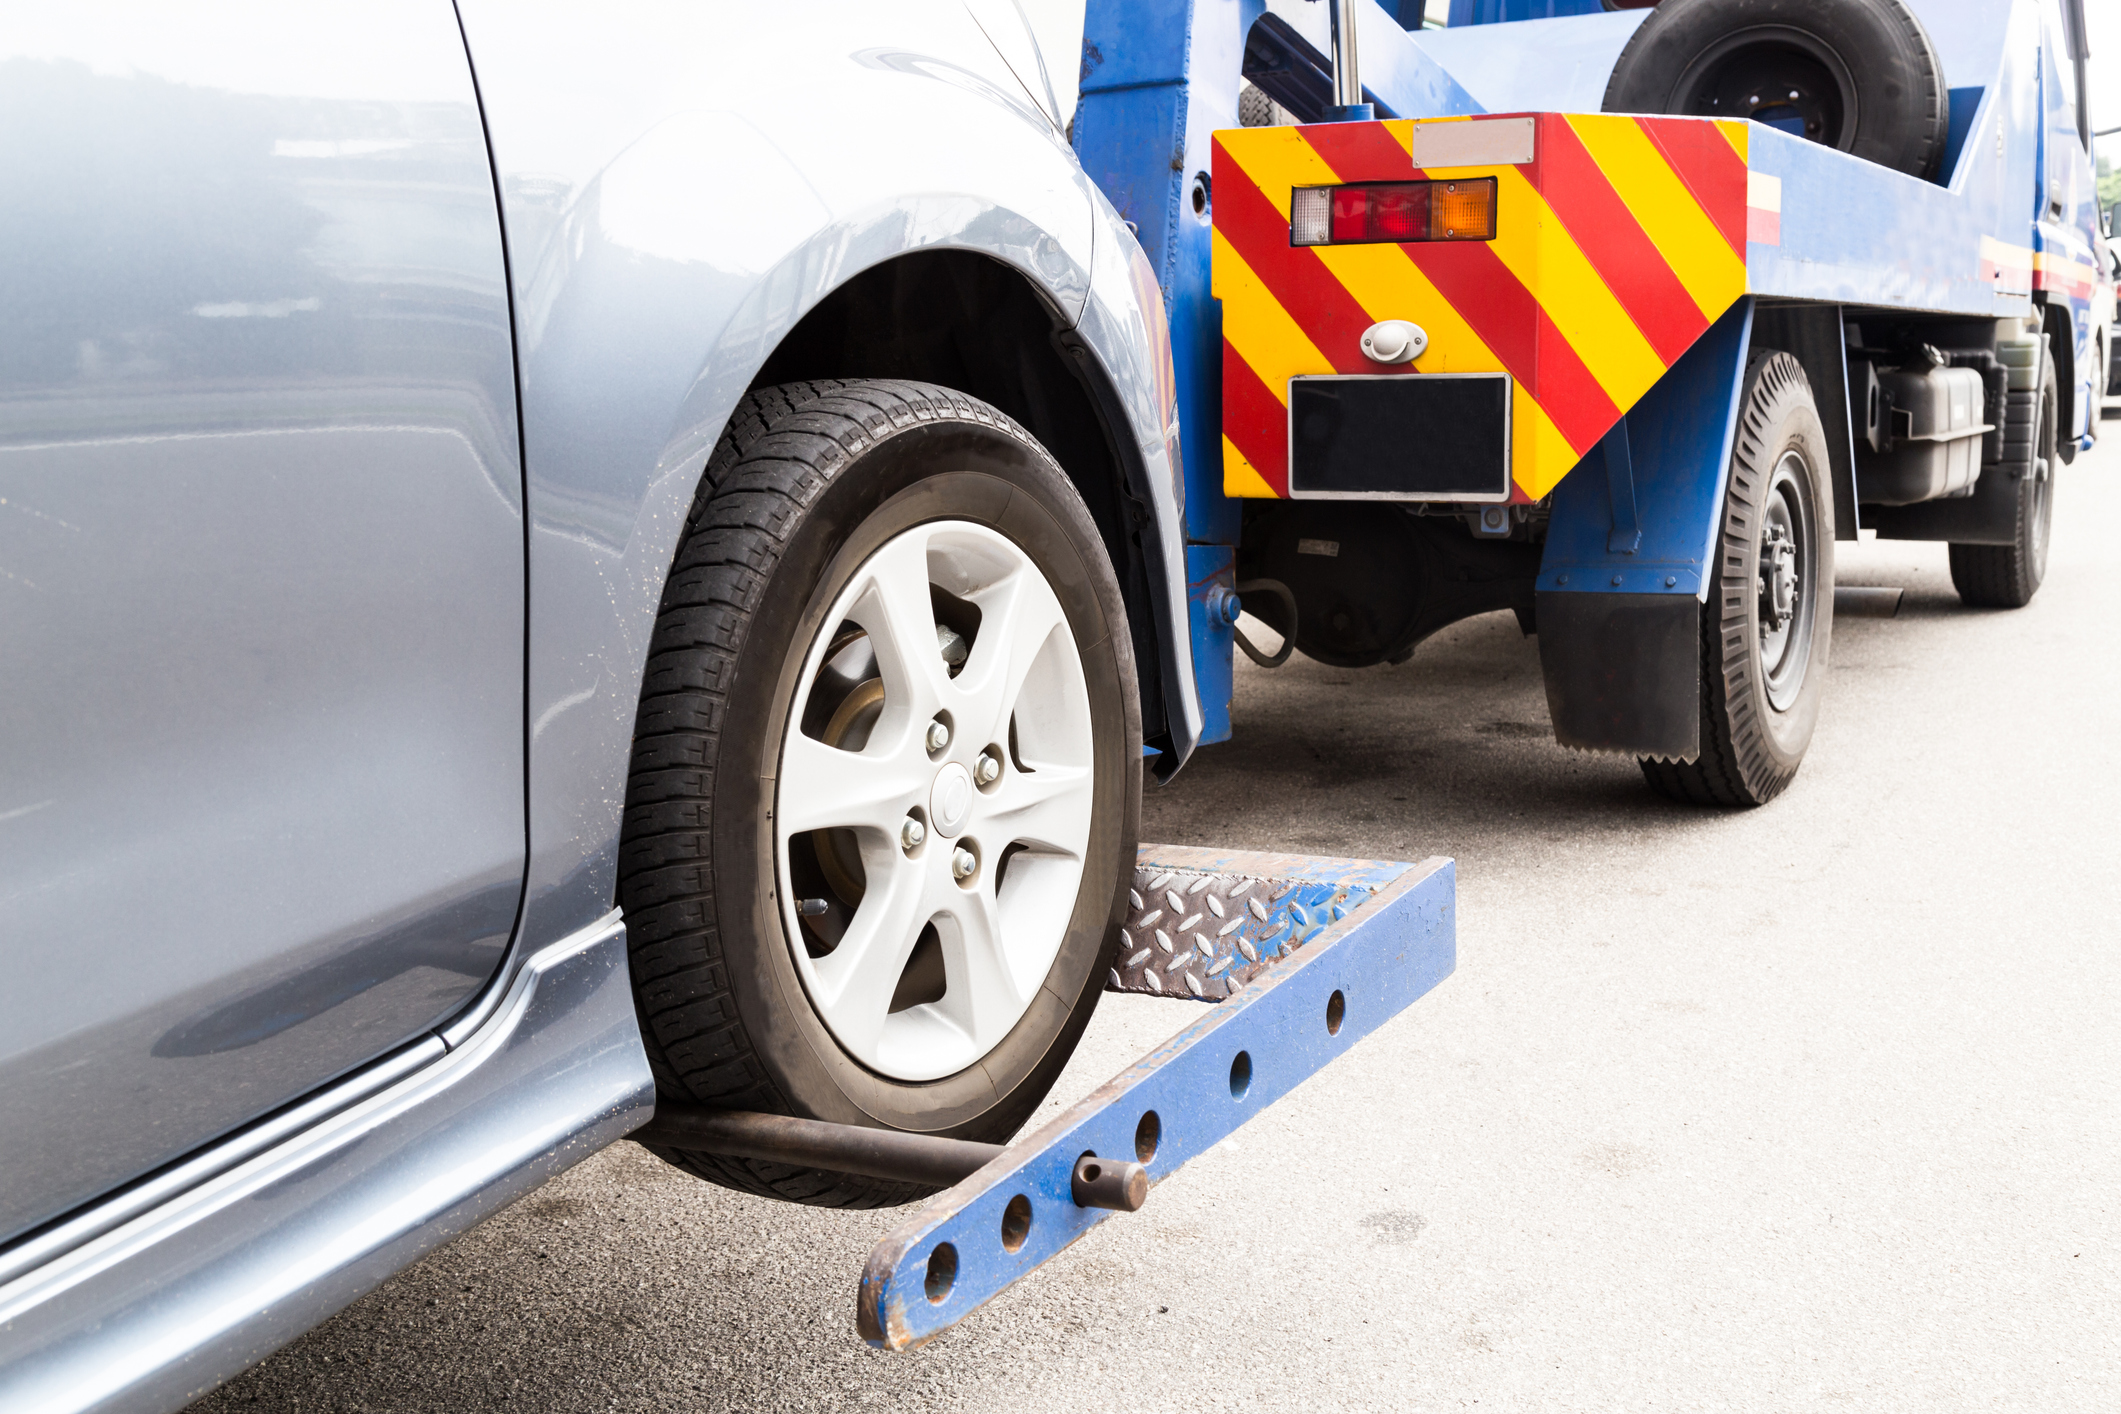 When to Call a Towing Service vs. When to Try to Fix Your Vehicle Yourself